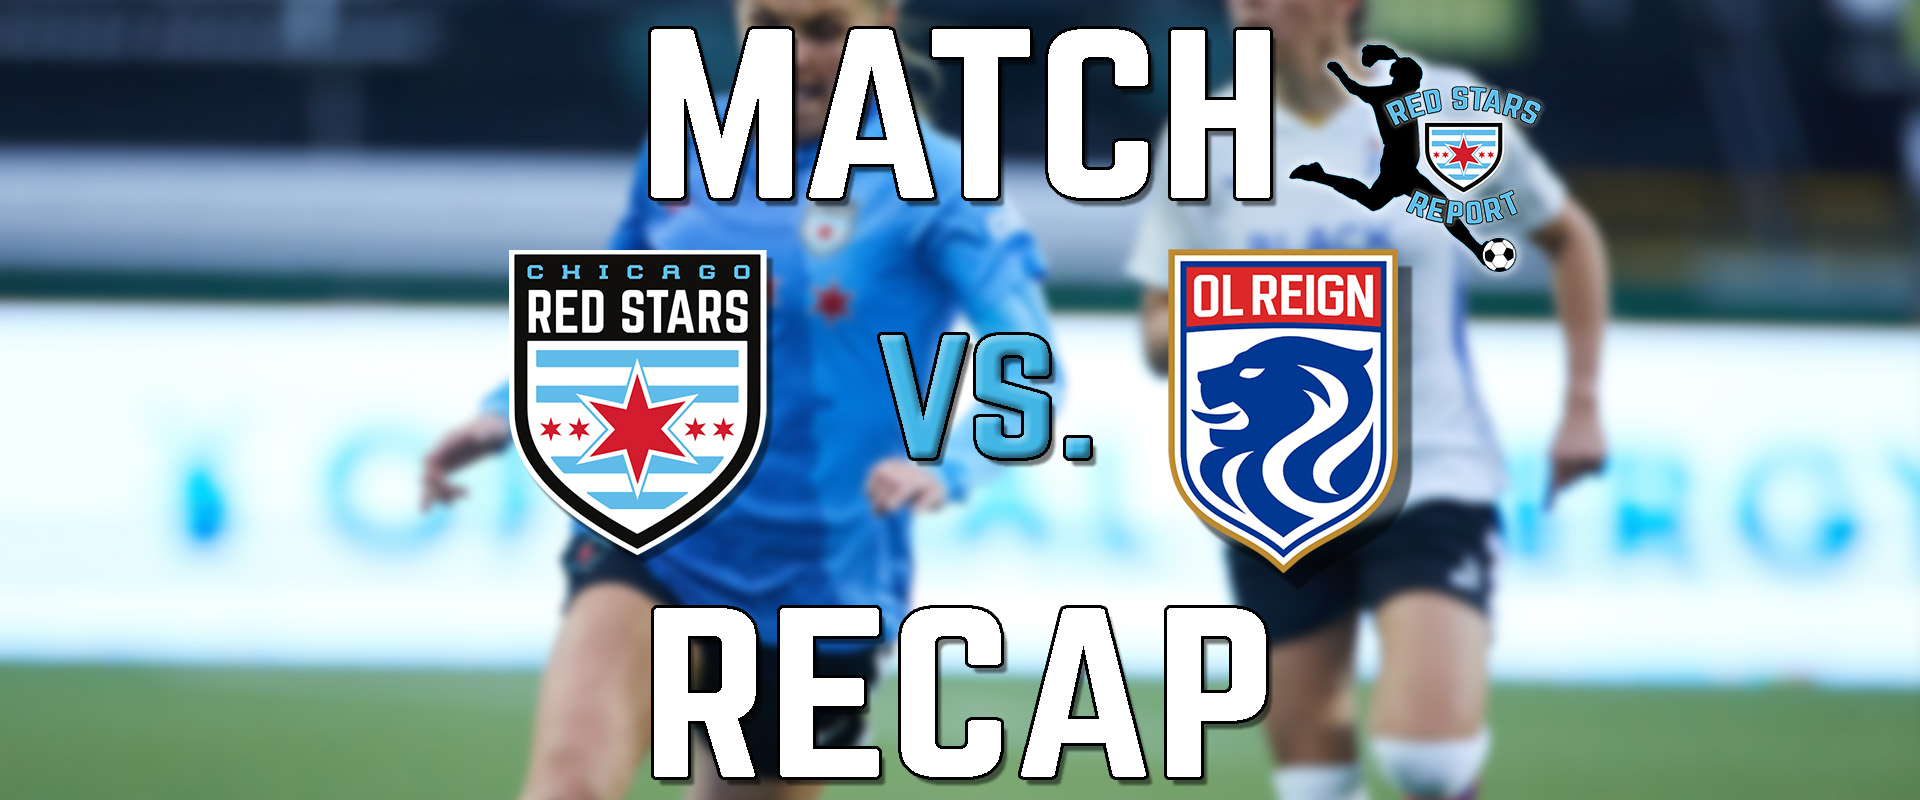 Ava Cook’s Lone Goal Not Enough in Red Stars’ 1-2 Loss to OL Reign